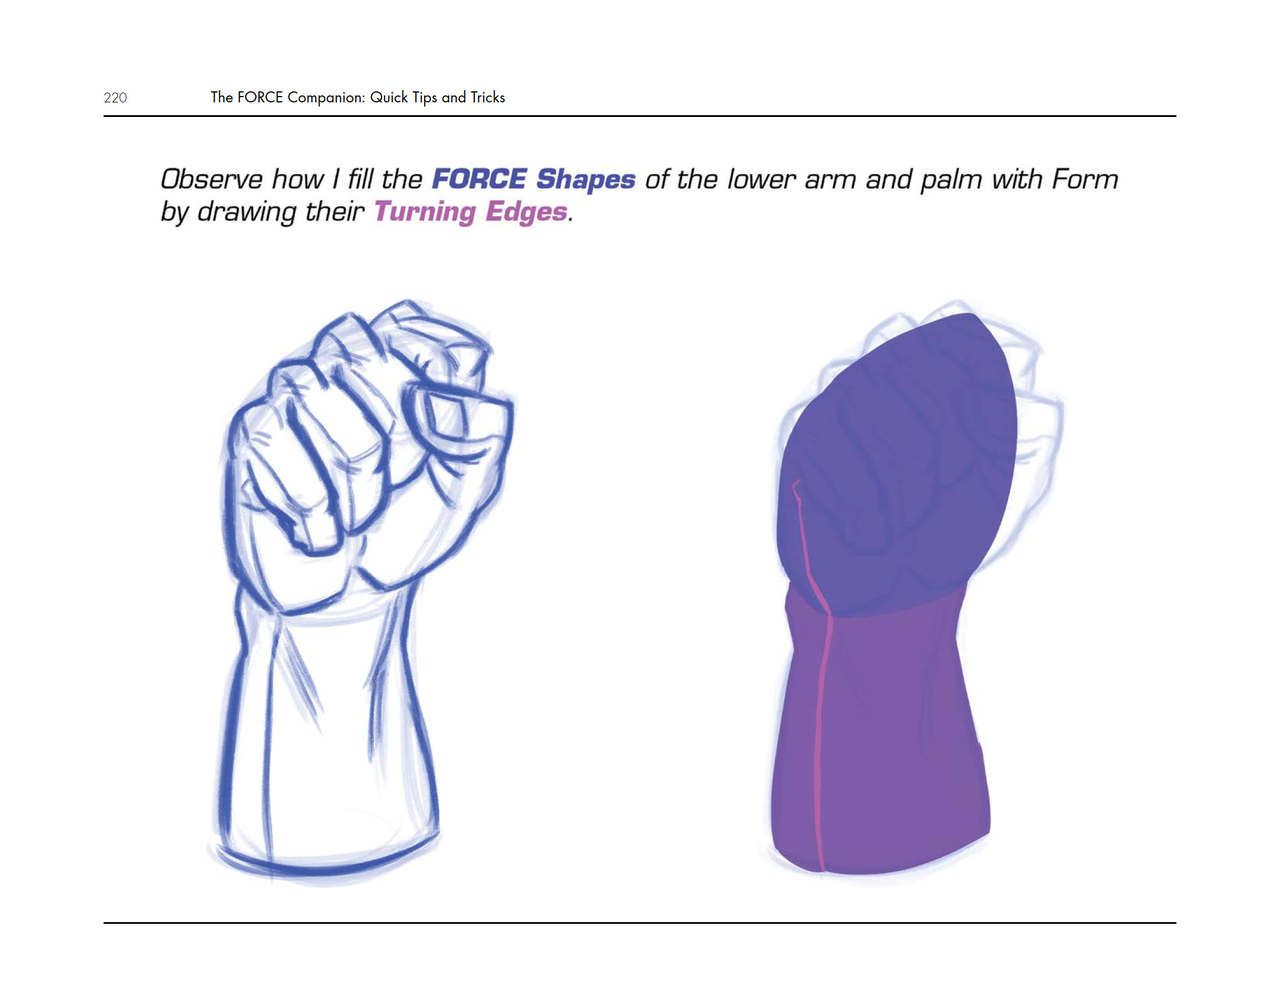 The Force companion_ quick tips and tricks-CRC Press (2019) - Michael D. Mattesi [Digital] 233